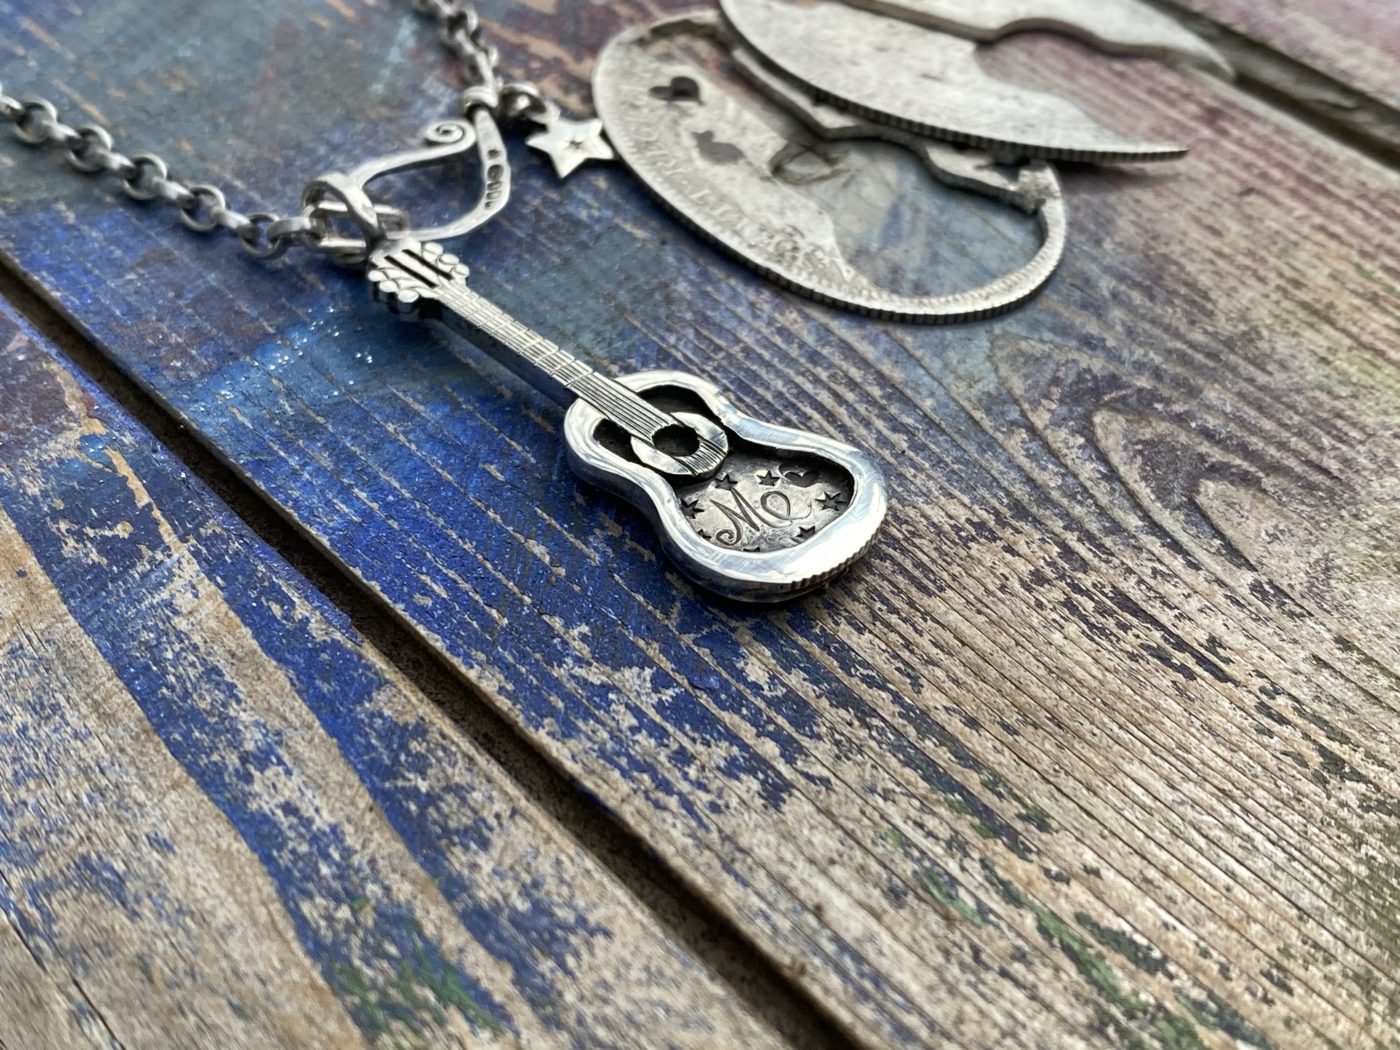 acoustic guitar necklace - handmade and recycled using silver coins